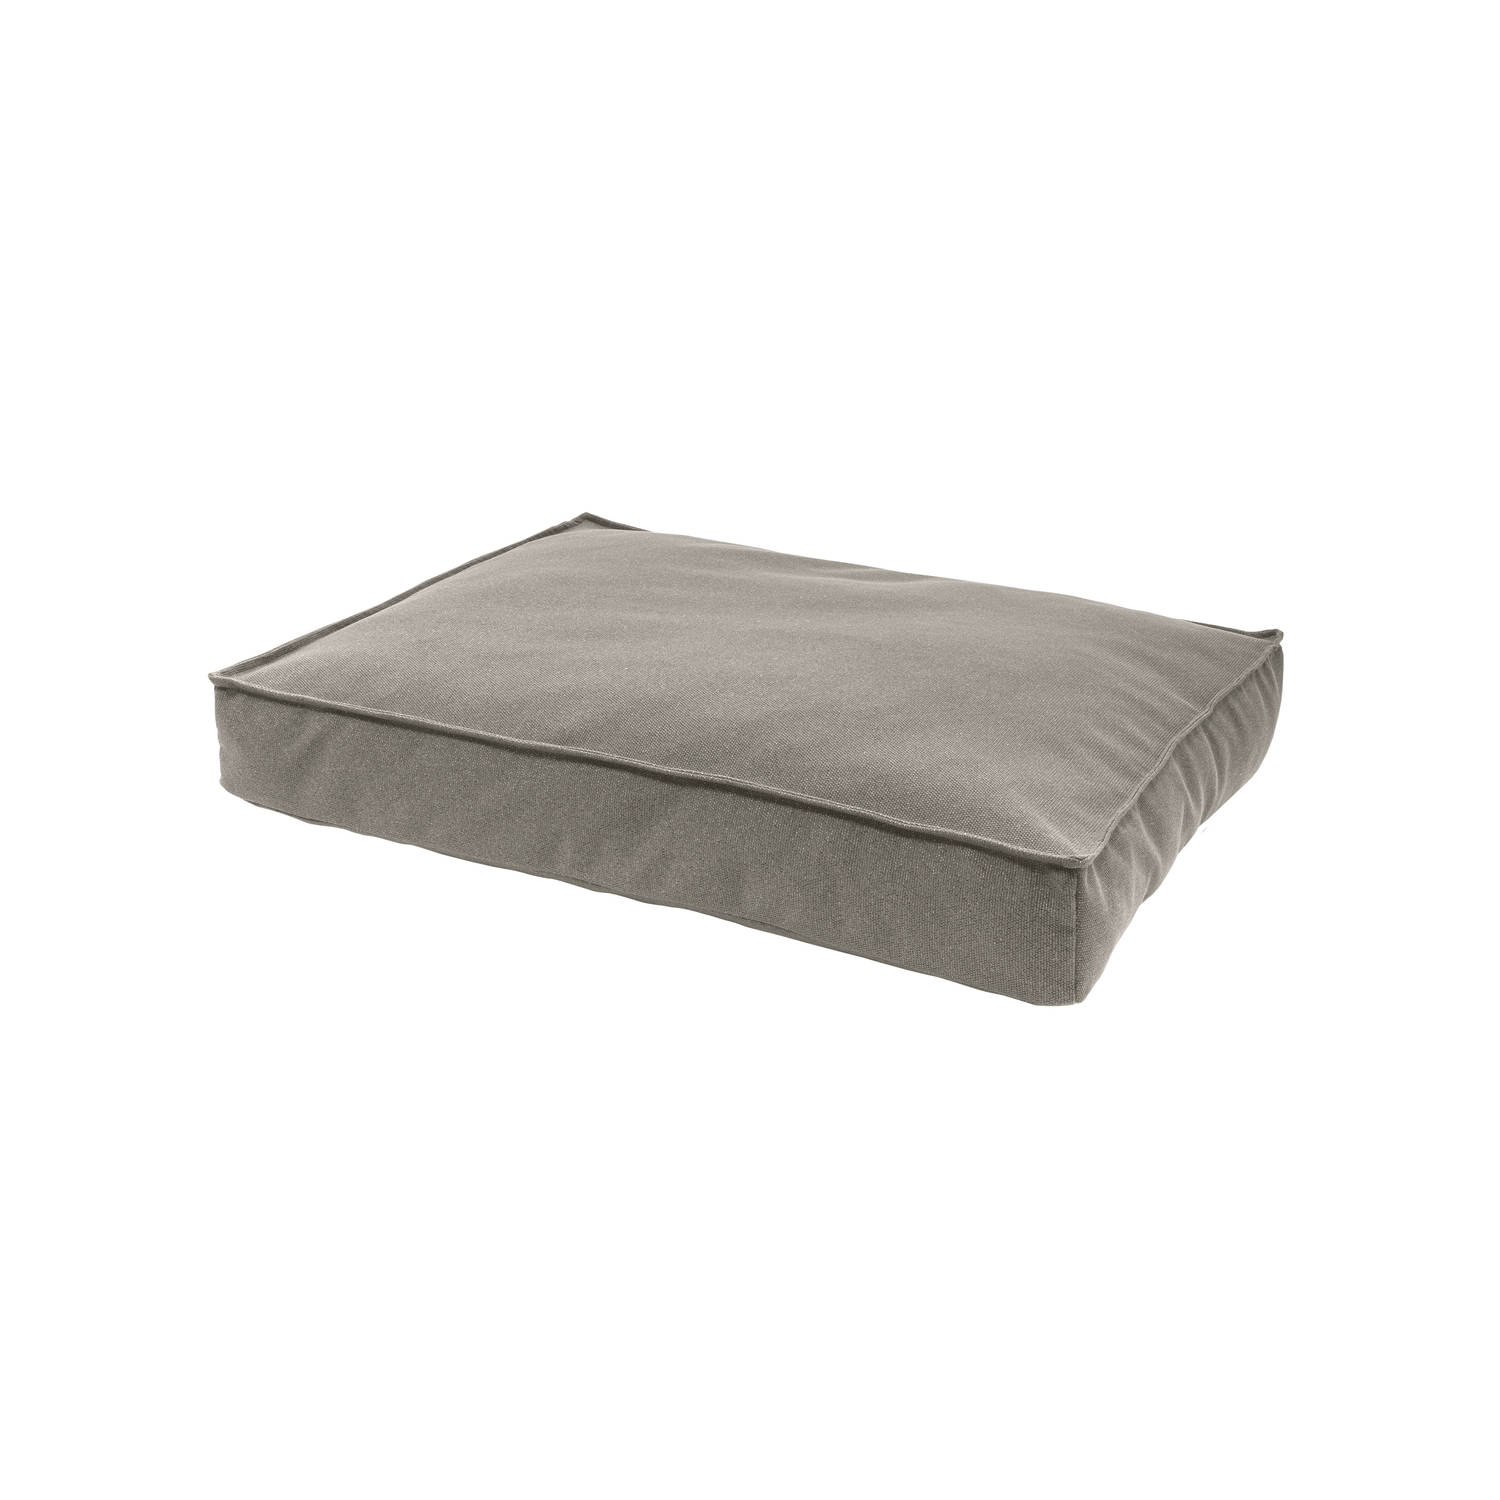 Madison - Hondenlounge 80x55 Manchester taupe outdoor S